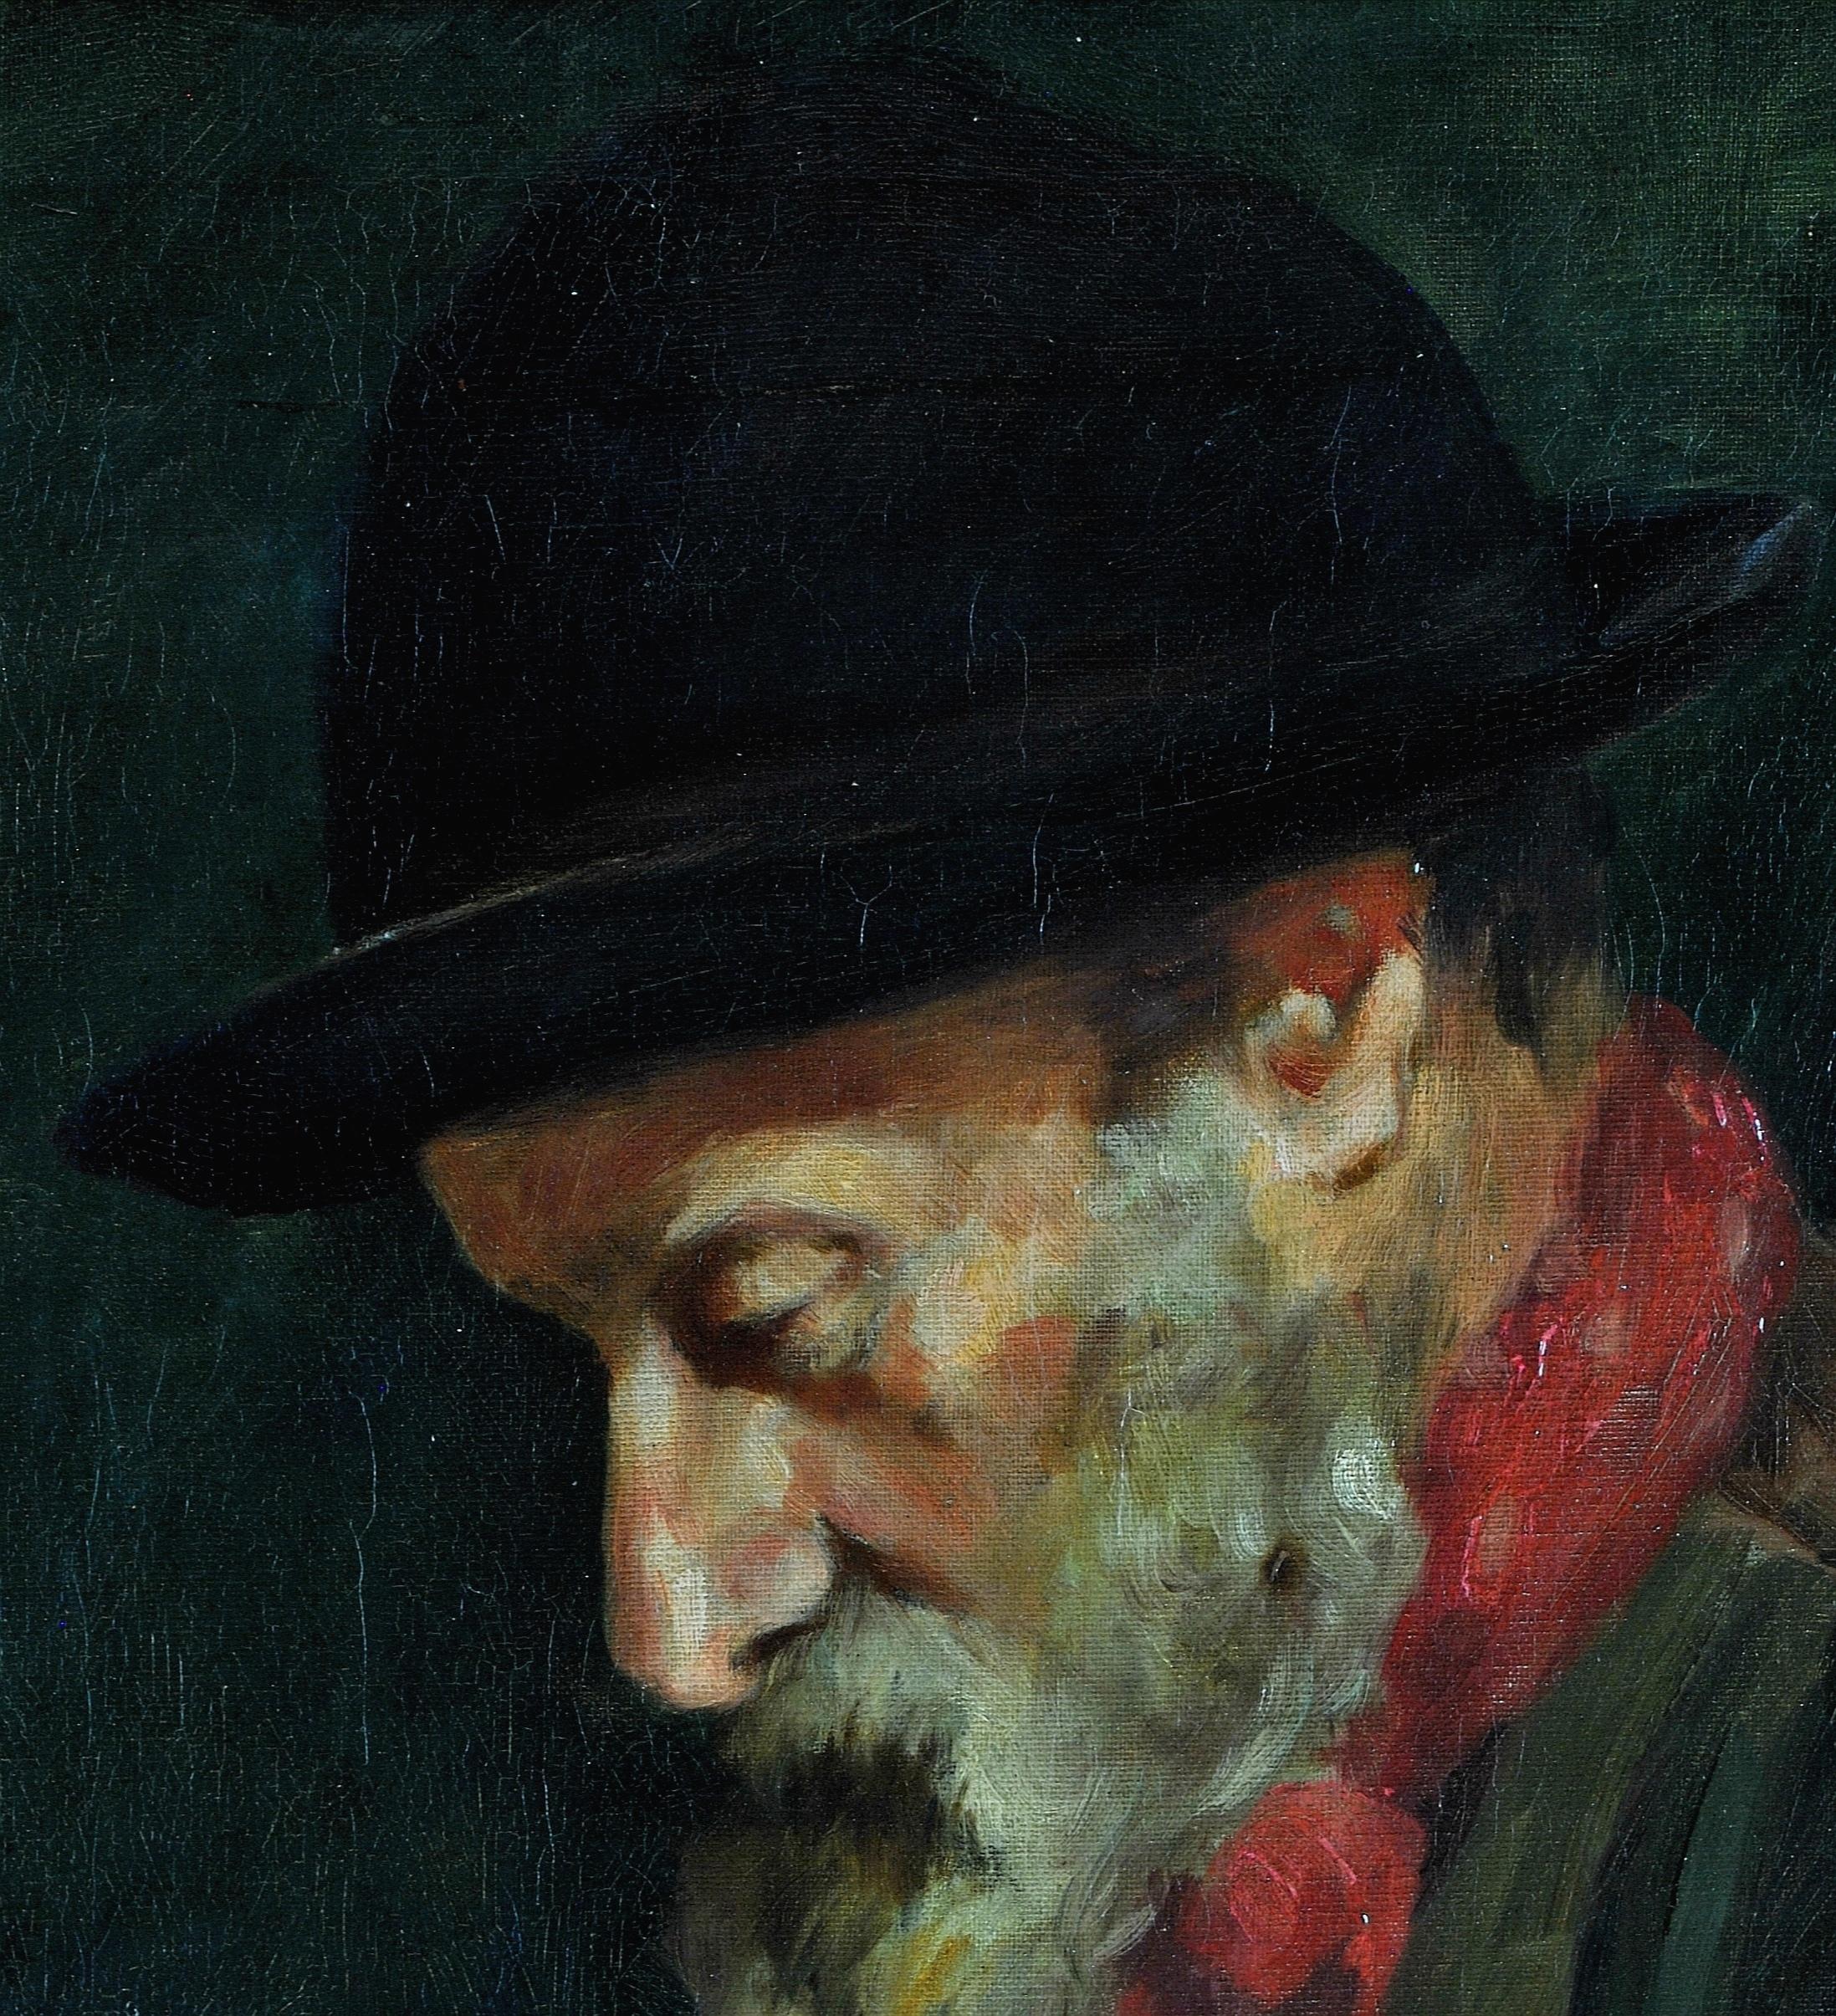 A fine late 19th century Newlyn School oil on canvas portrait of a Cornish man. Fine quality portrait of the elderly working man seated in a chair wearing dark clothing and a red scarf, with a beautiful dappled light falling on his face.

Very close